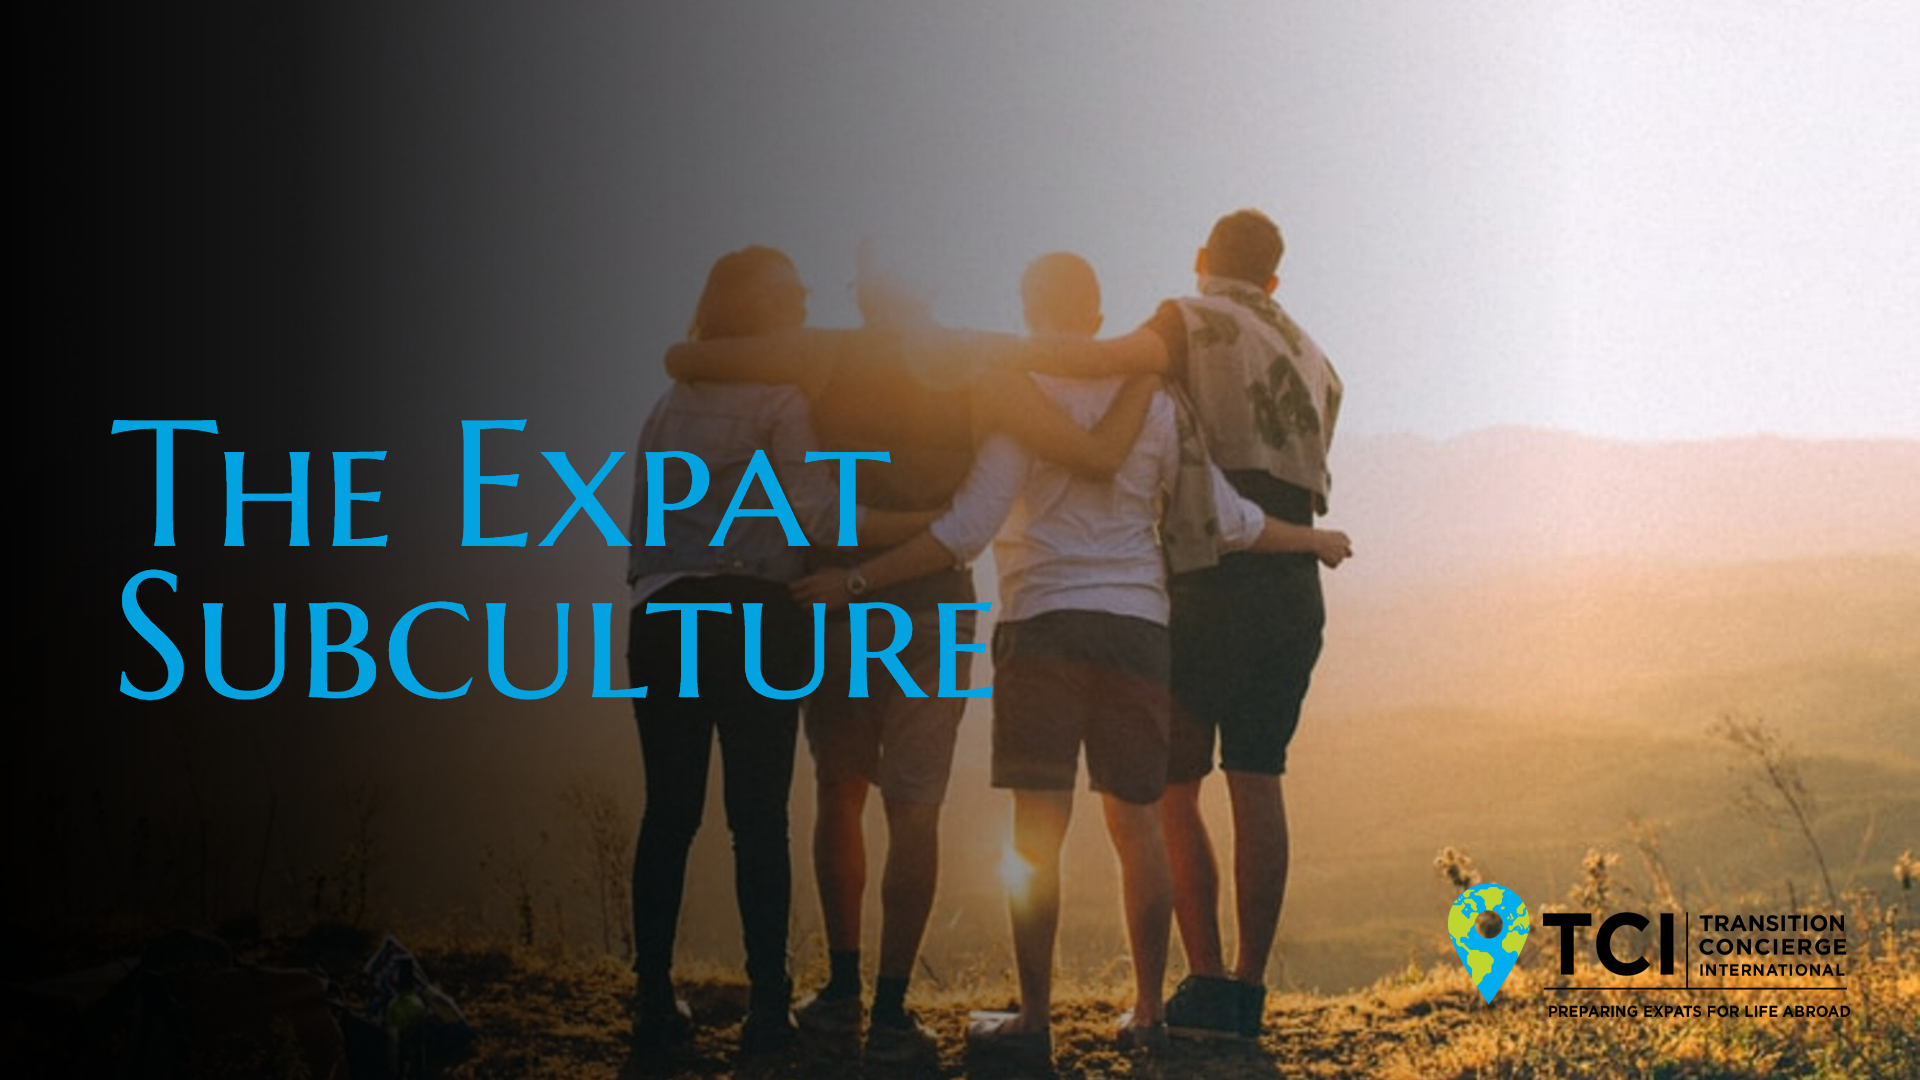 The Expat Subculture - TCI